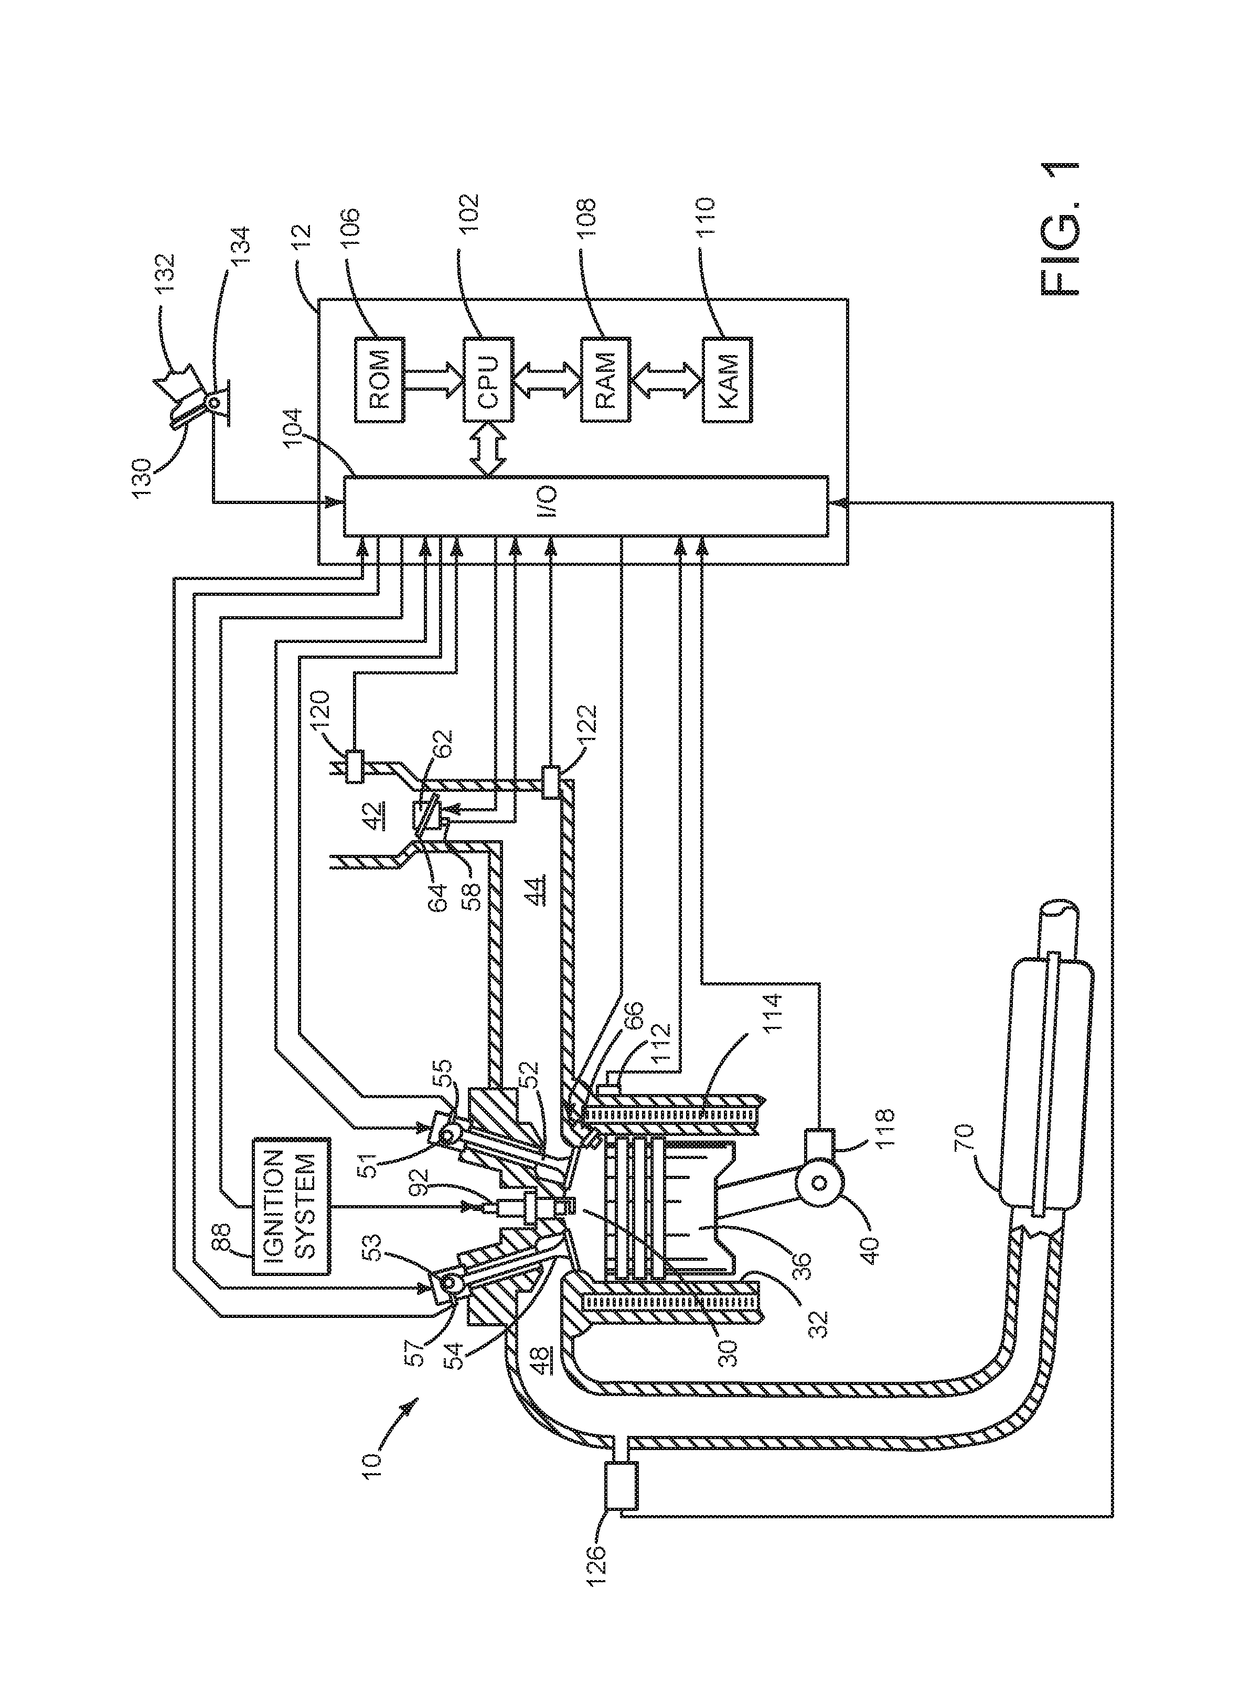 System and method for detecting engine knock and misfire